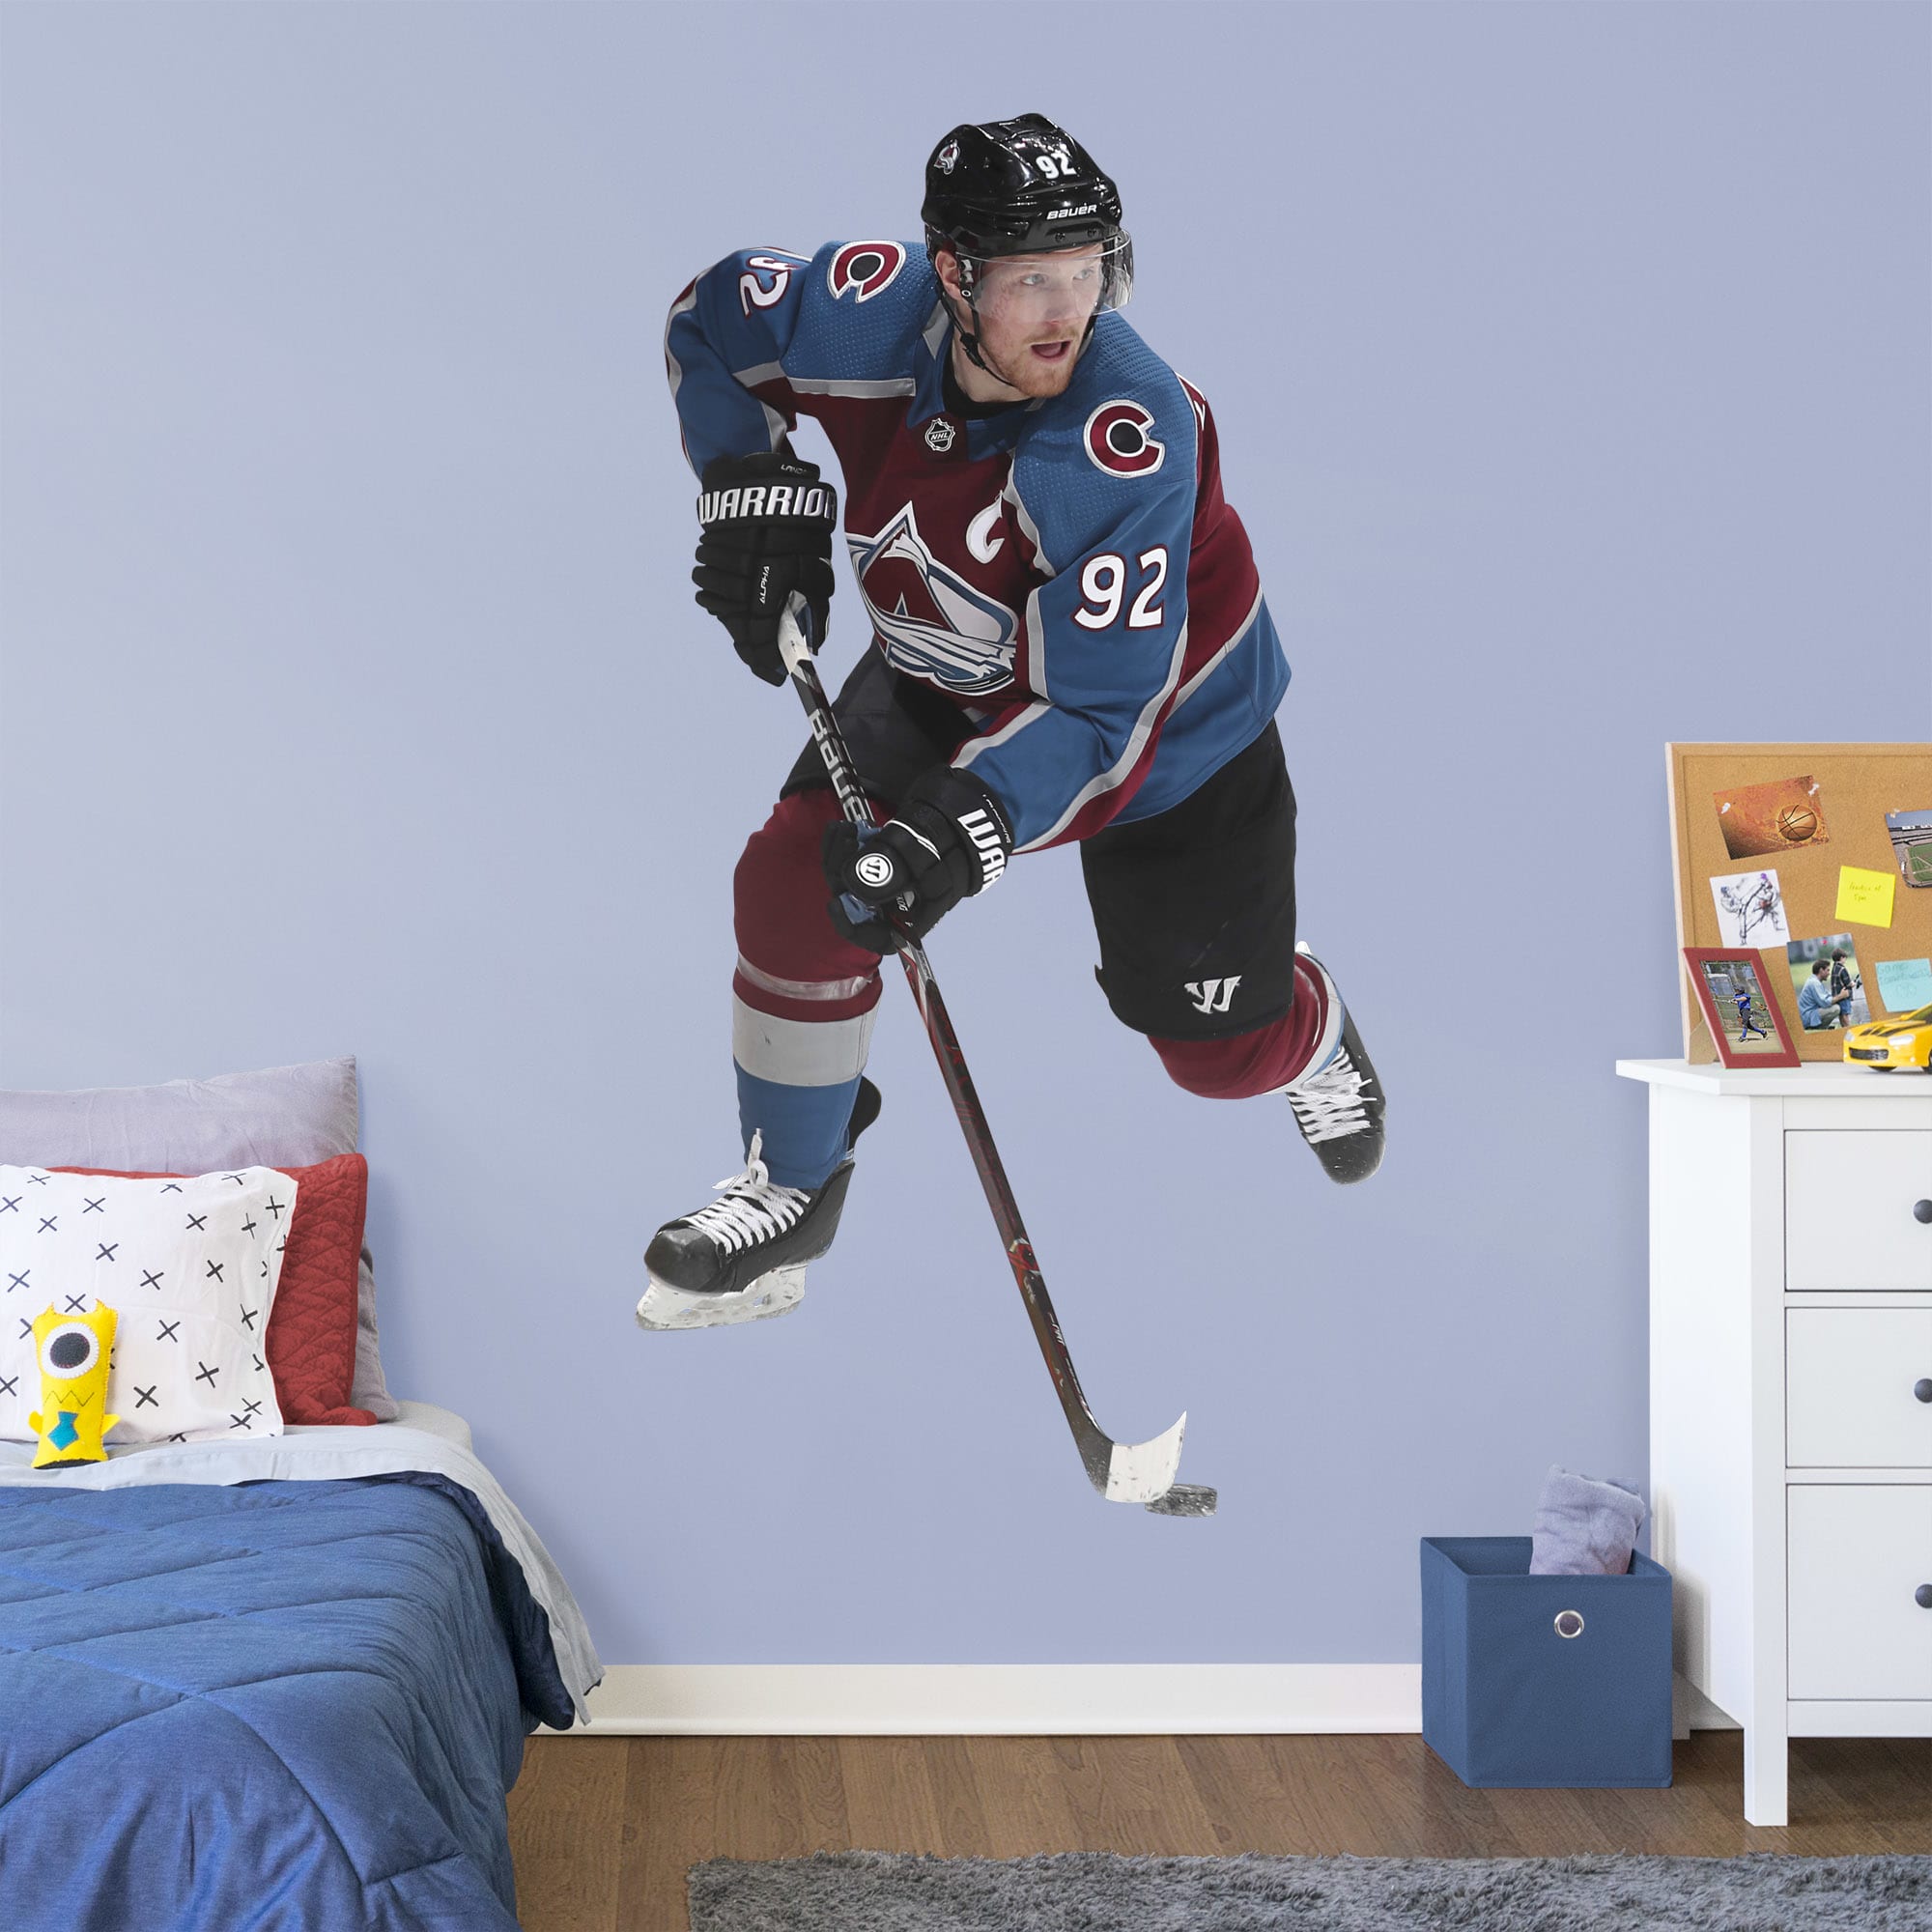 Gabriel Landeskog for Colorado Avalanche - Officially Licensed NHL Removable Wall Decal Life-Size Athlete + 2 Decals (42"W x 78"